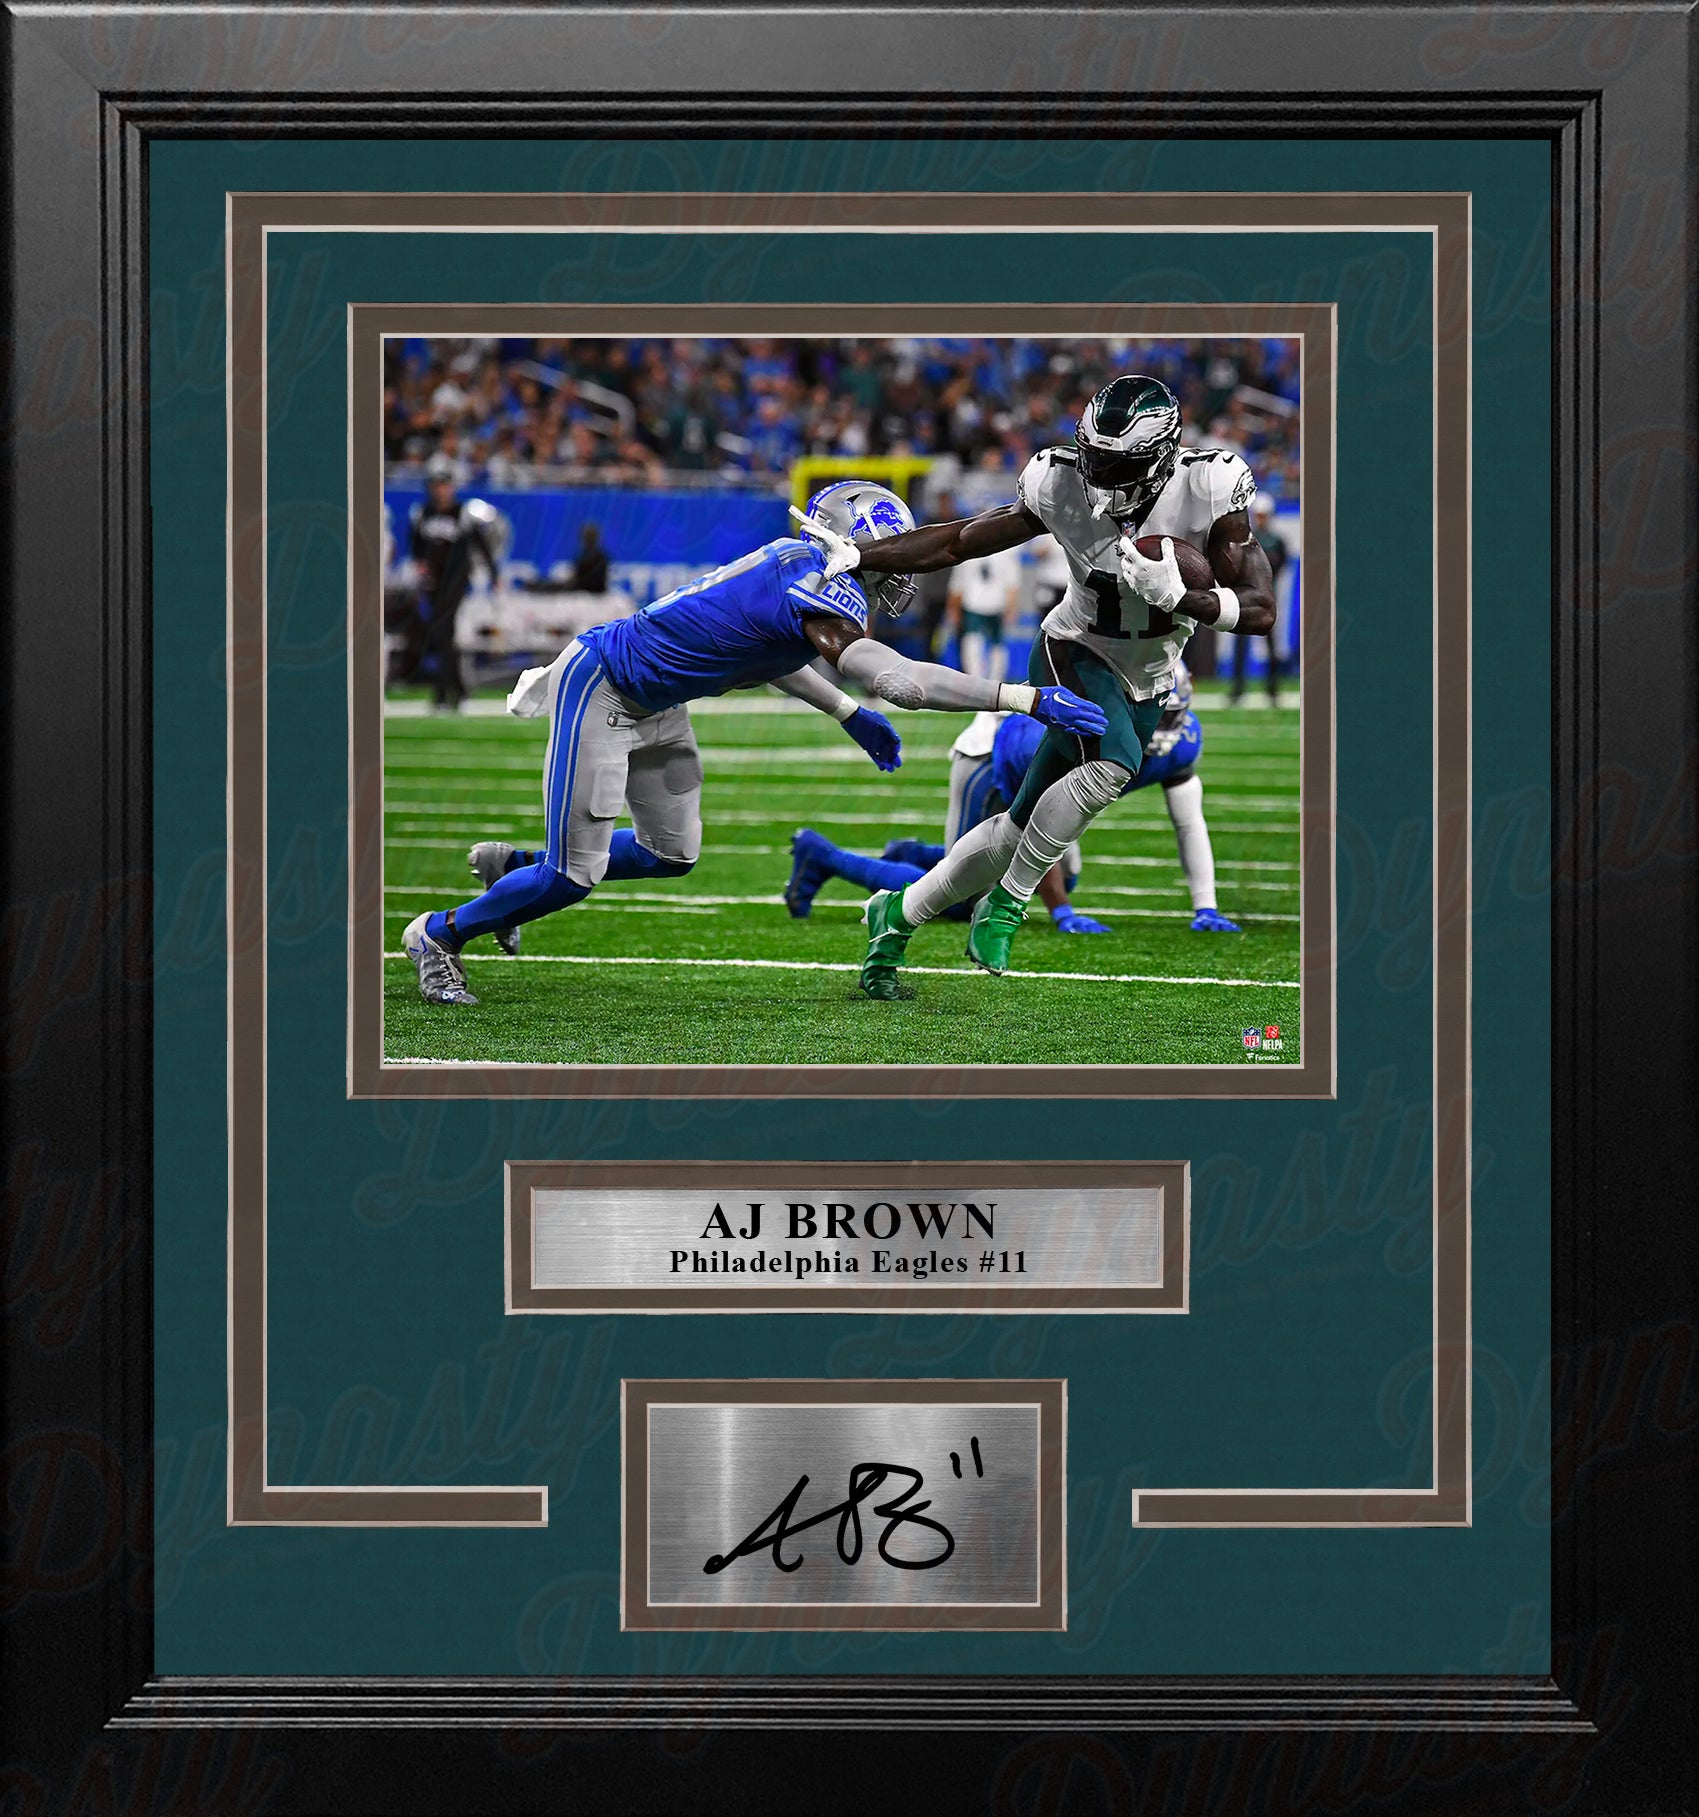 AJ Brown in Action Philadelphia Eagles 8" x 10" Framed Football Photo with Engraved Autograph - Dynasty Sports & Framing 